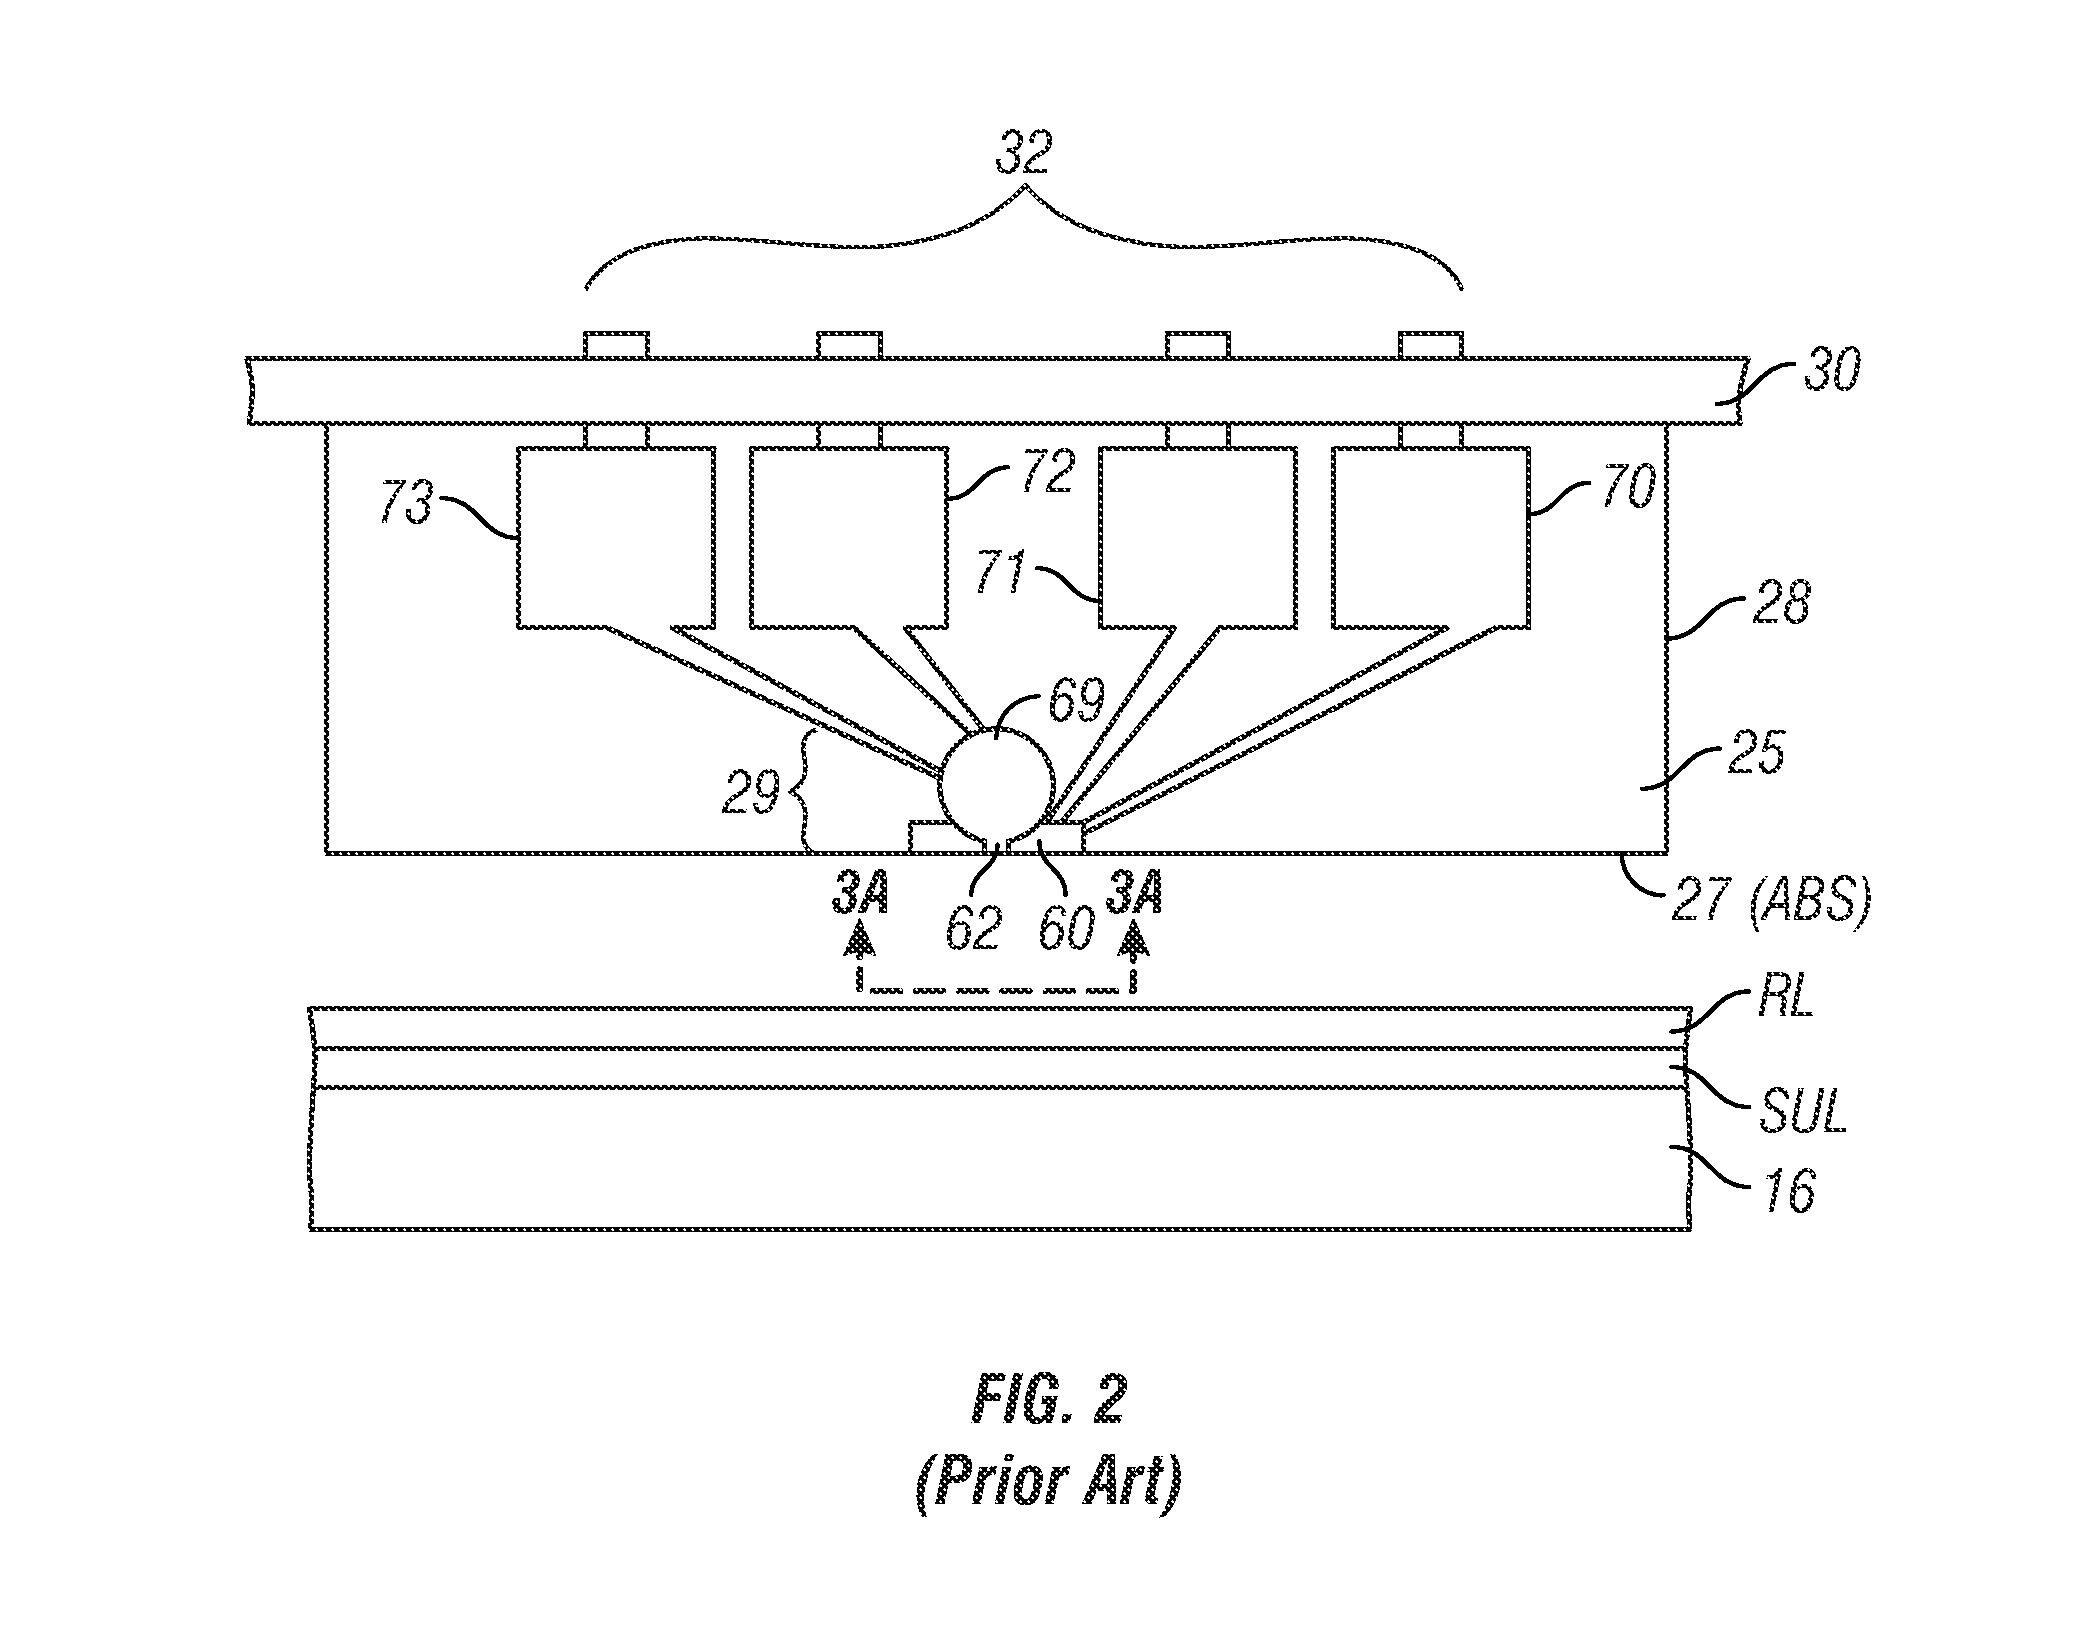 Perpendicular magnetic recording write head with ladder network compensation circuitry on slider body for write current overshoot at write current switching